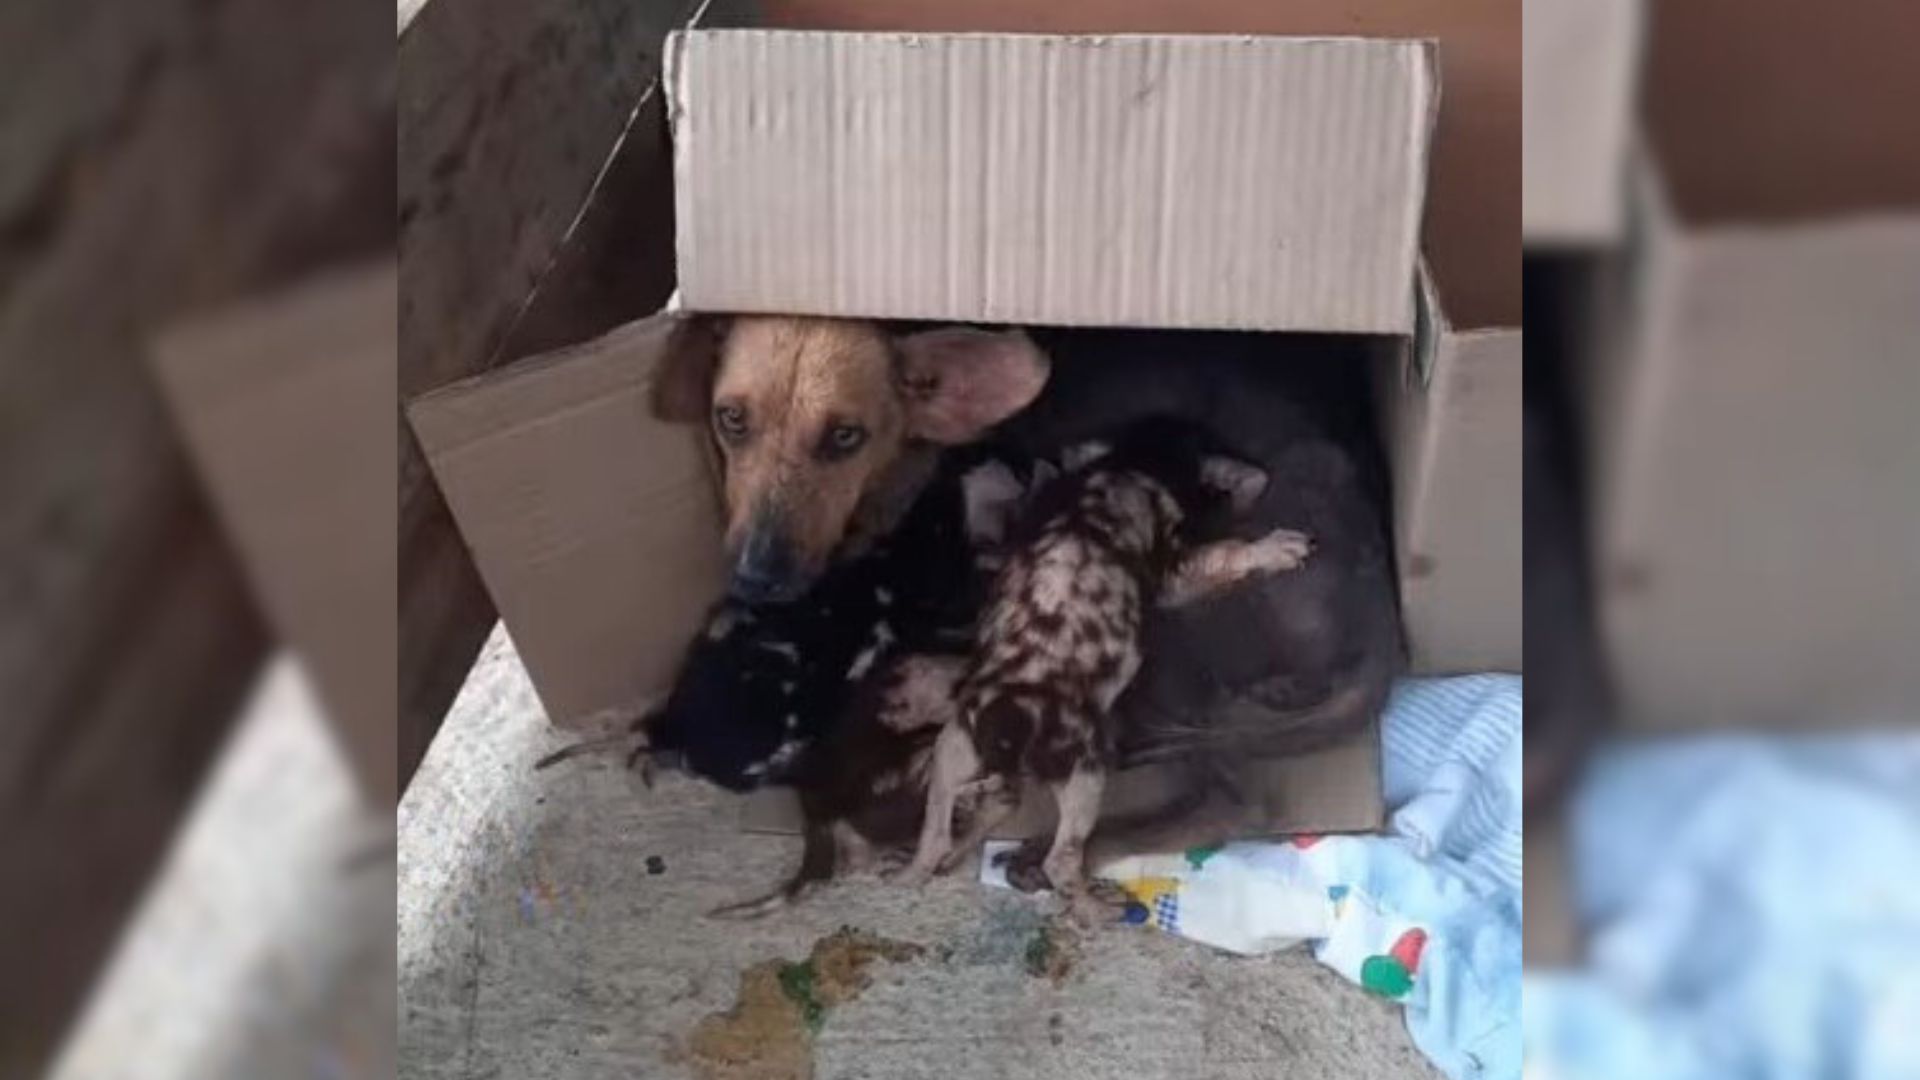 Mother Dog Was Cuddling Her Crying And Sick Puppies After They Were Dumped Near The Train Tracks